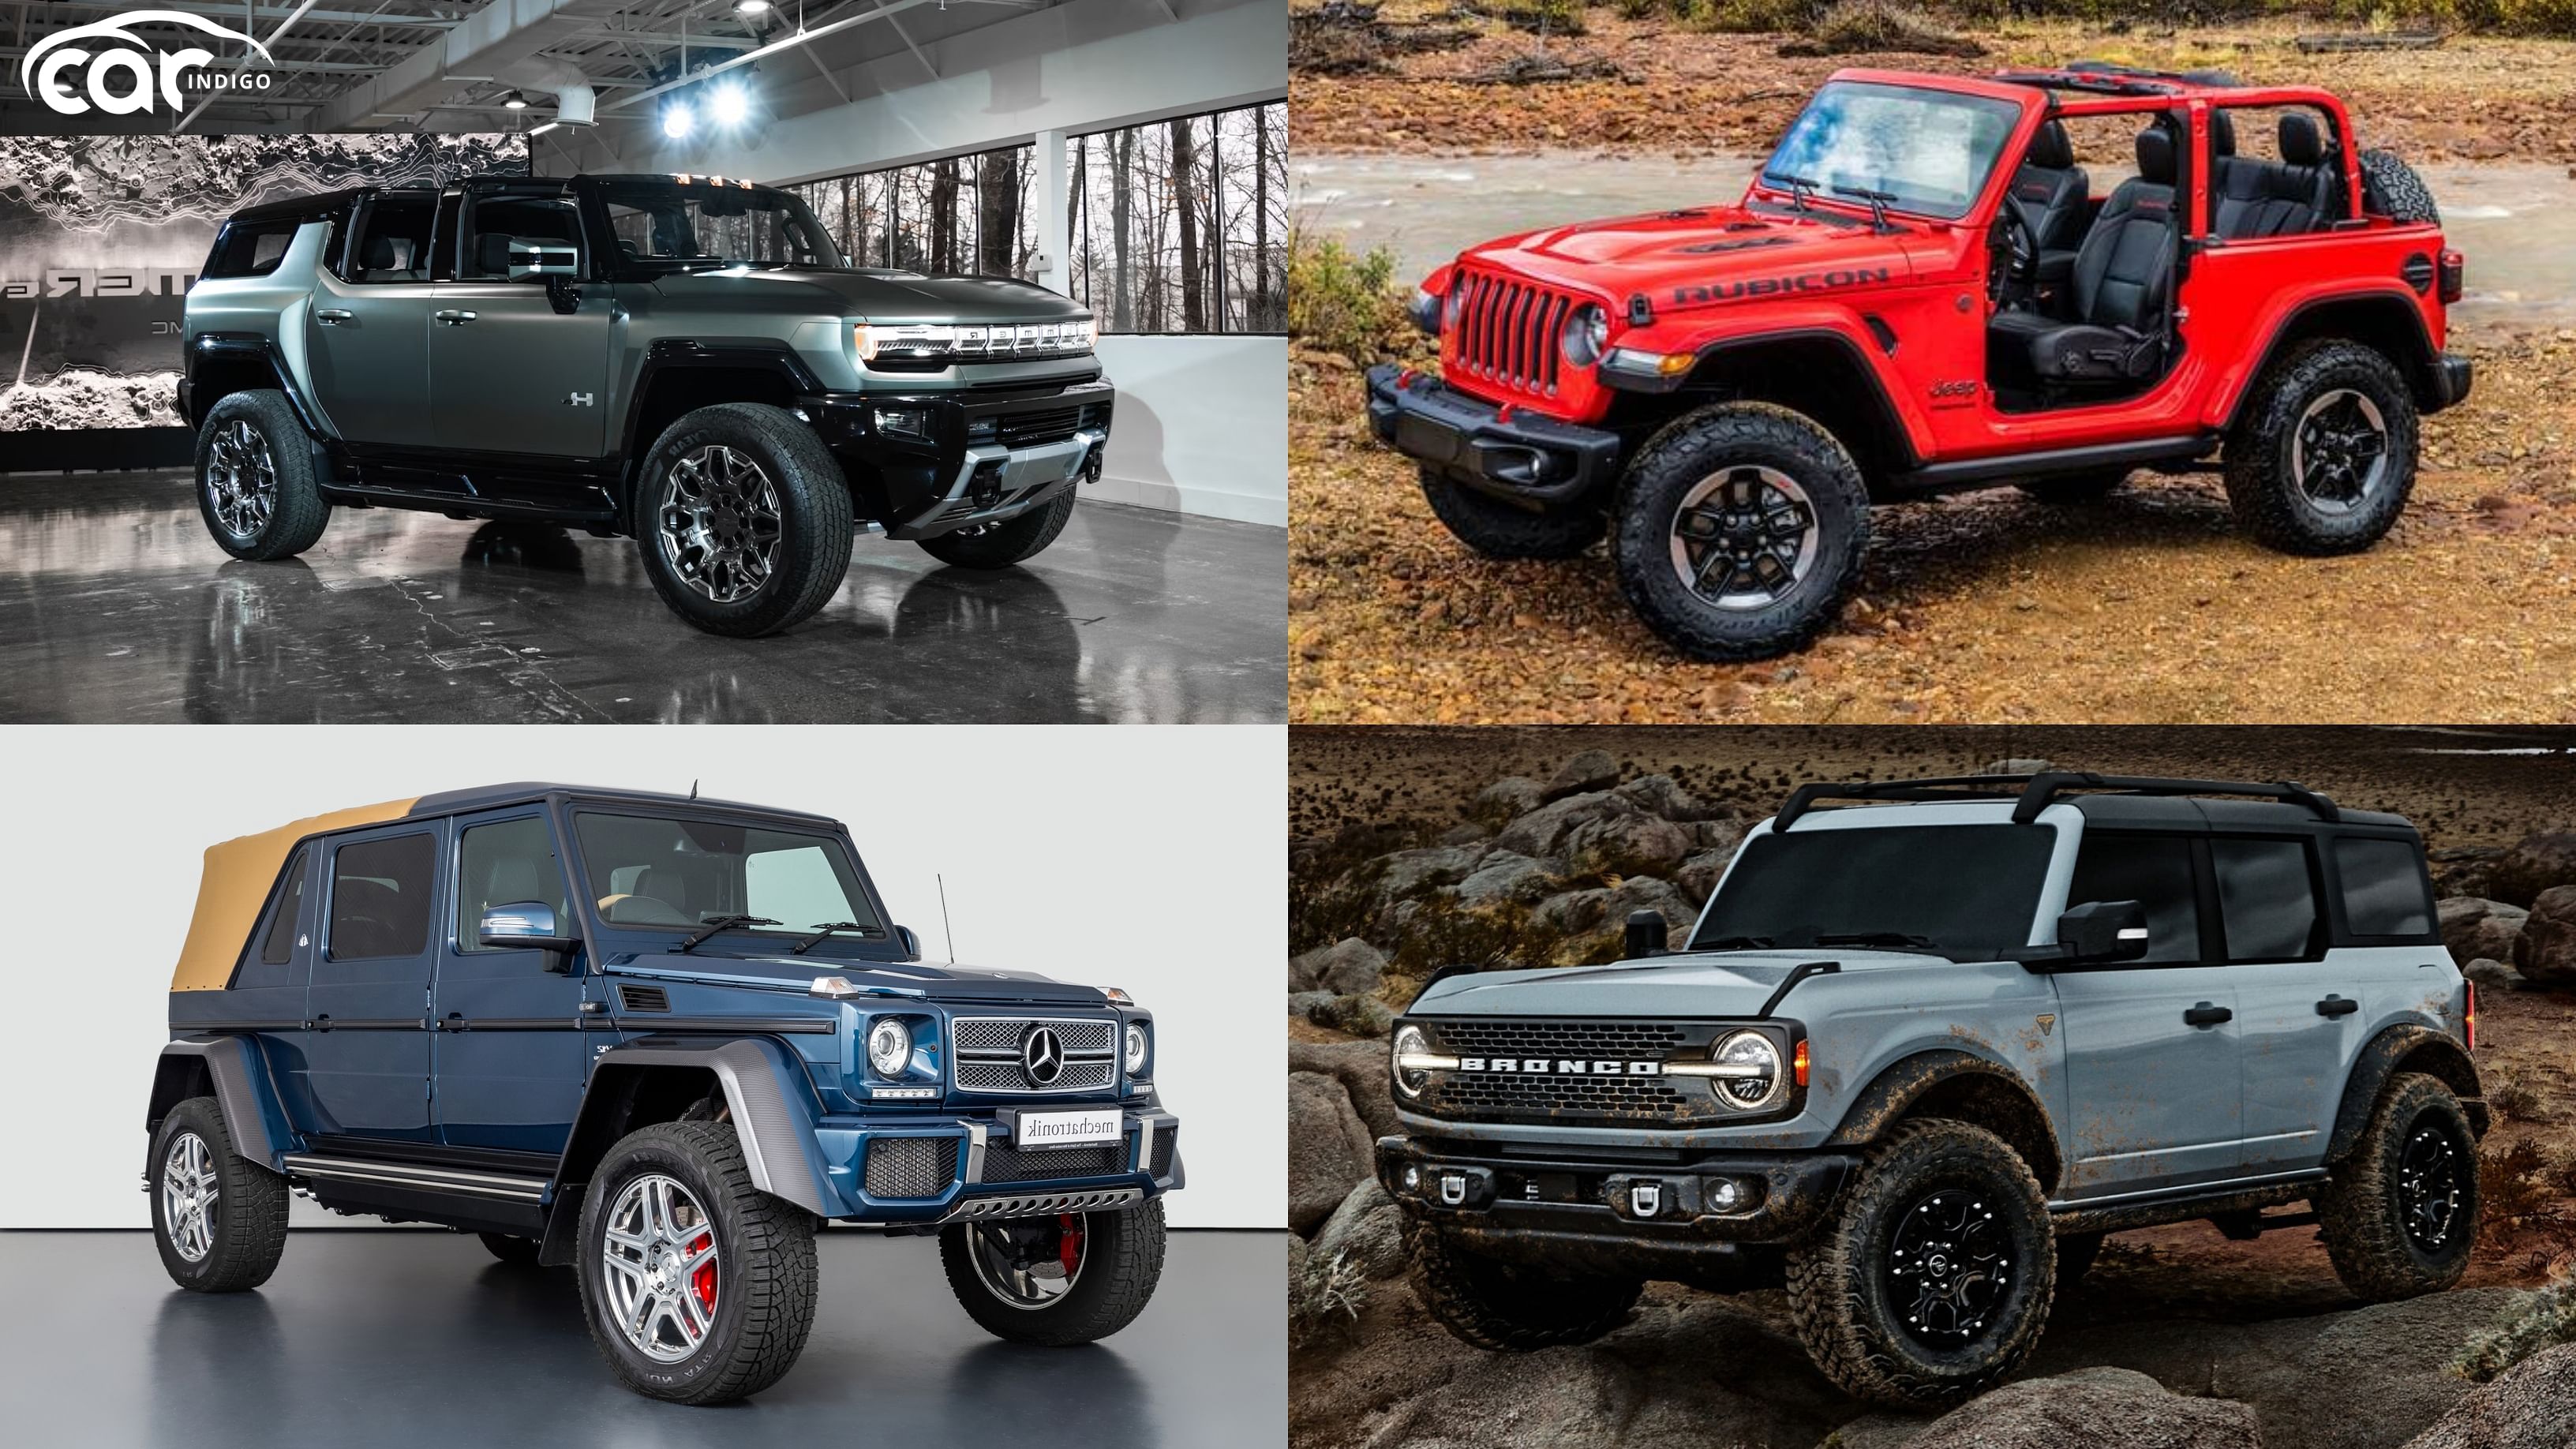 10 Of The Most Imposing Convertible SUVs On The Market's image